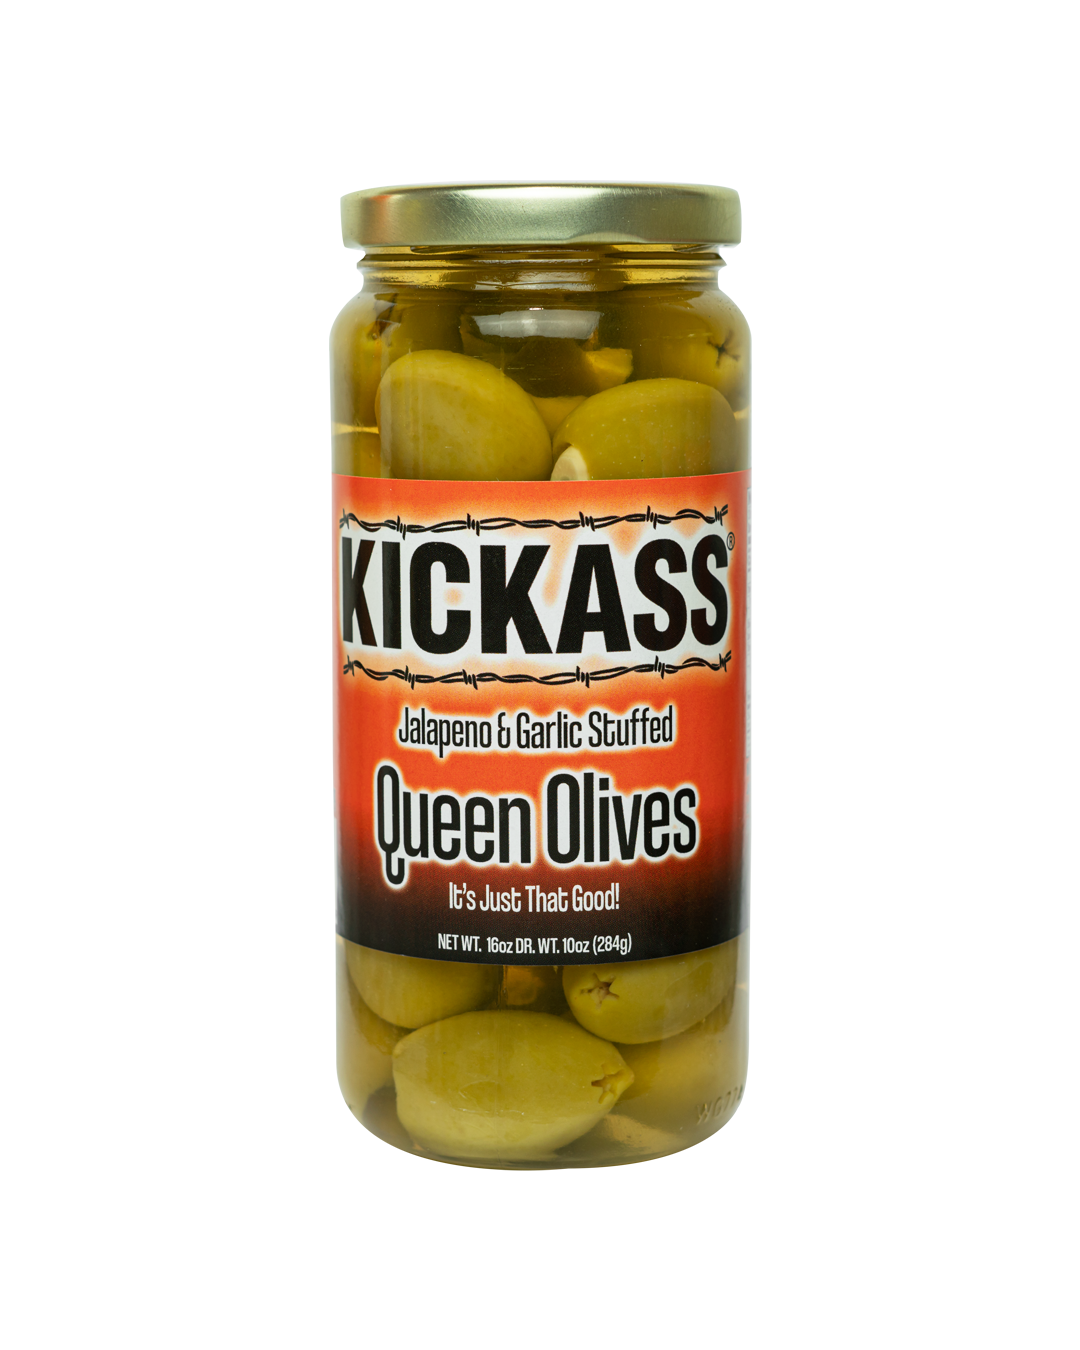 **new** Kickass Jalapeno & Garlic Stuffed Queen Olives 16Oz - 2 Pack Pickled